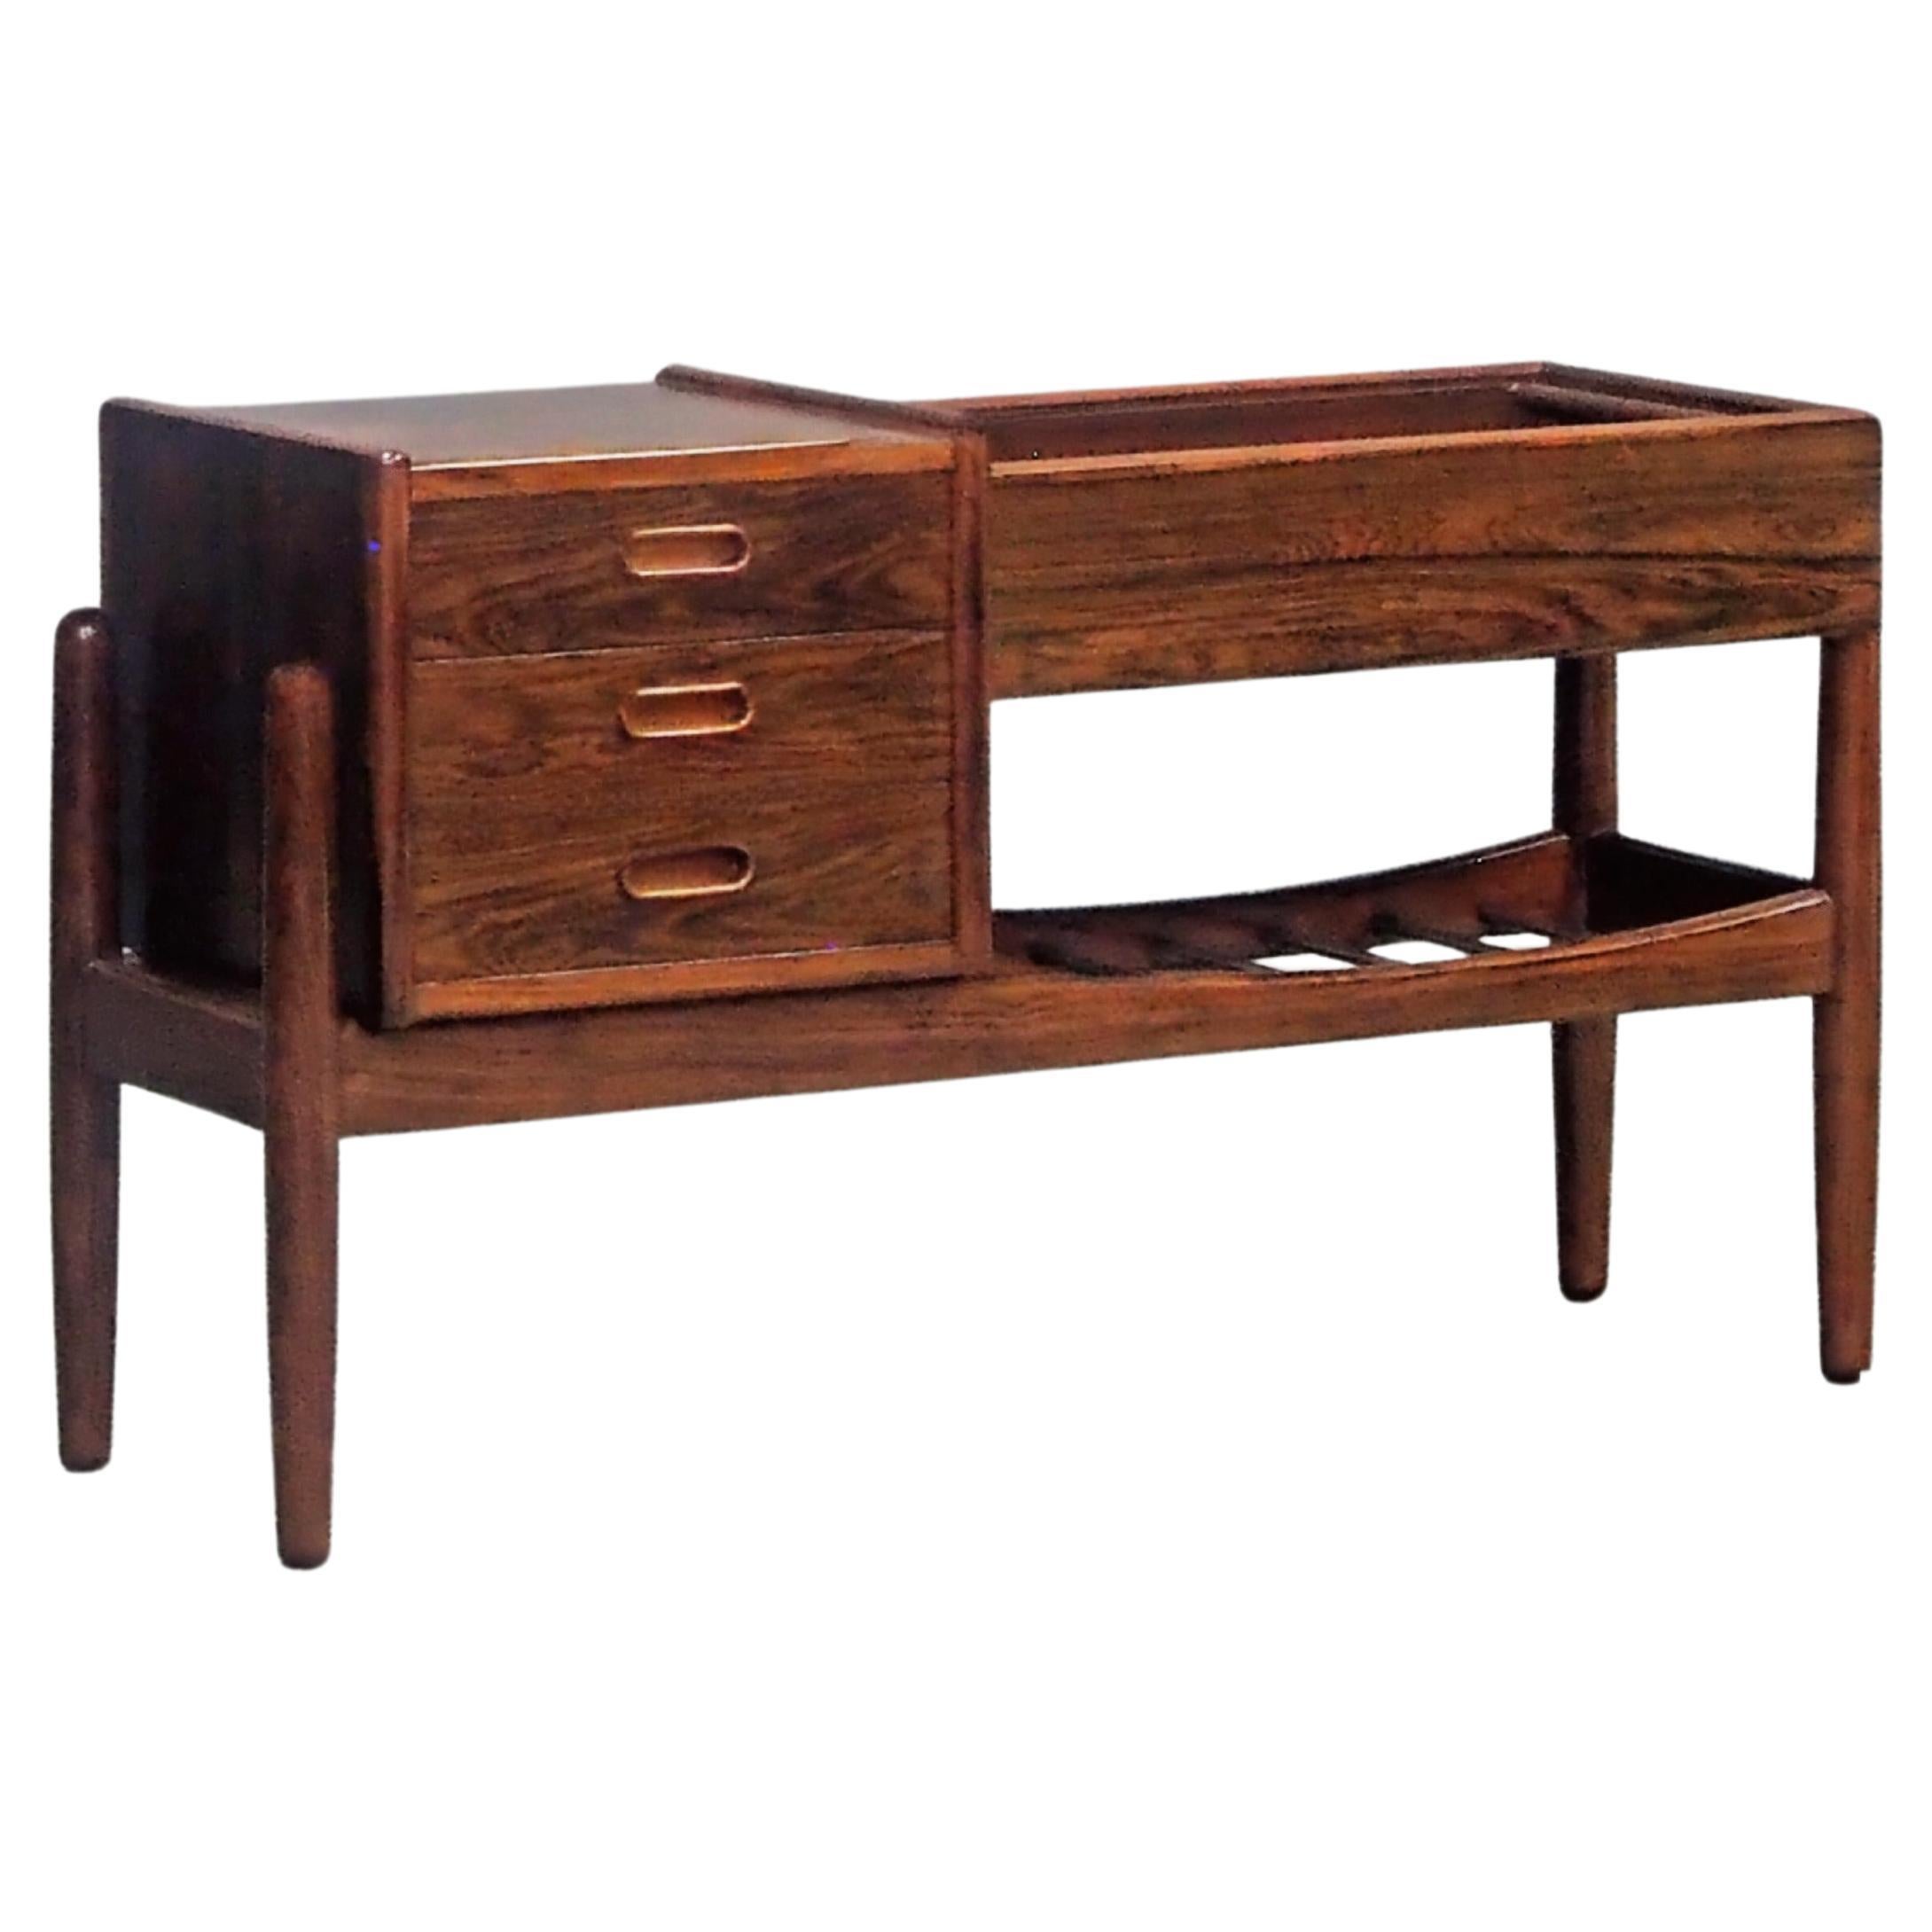 Arne Wahl Iversen Rosewood Planter console table 